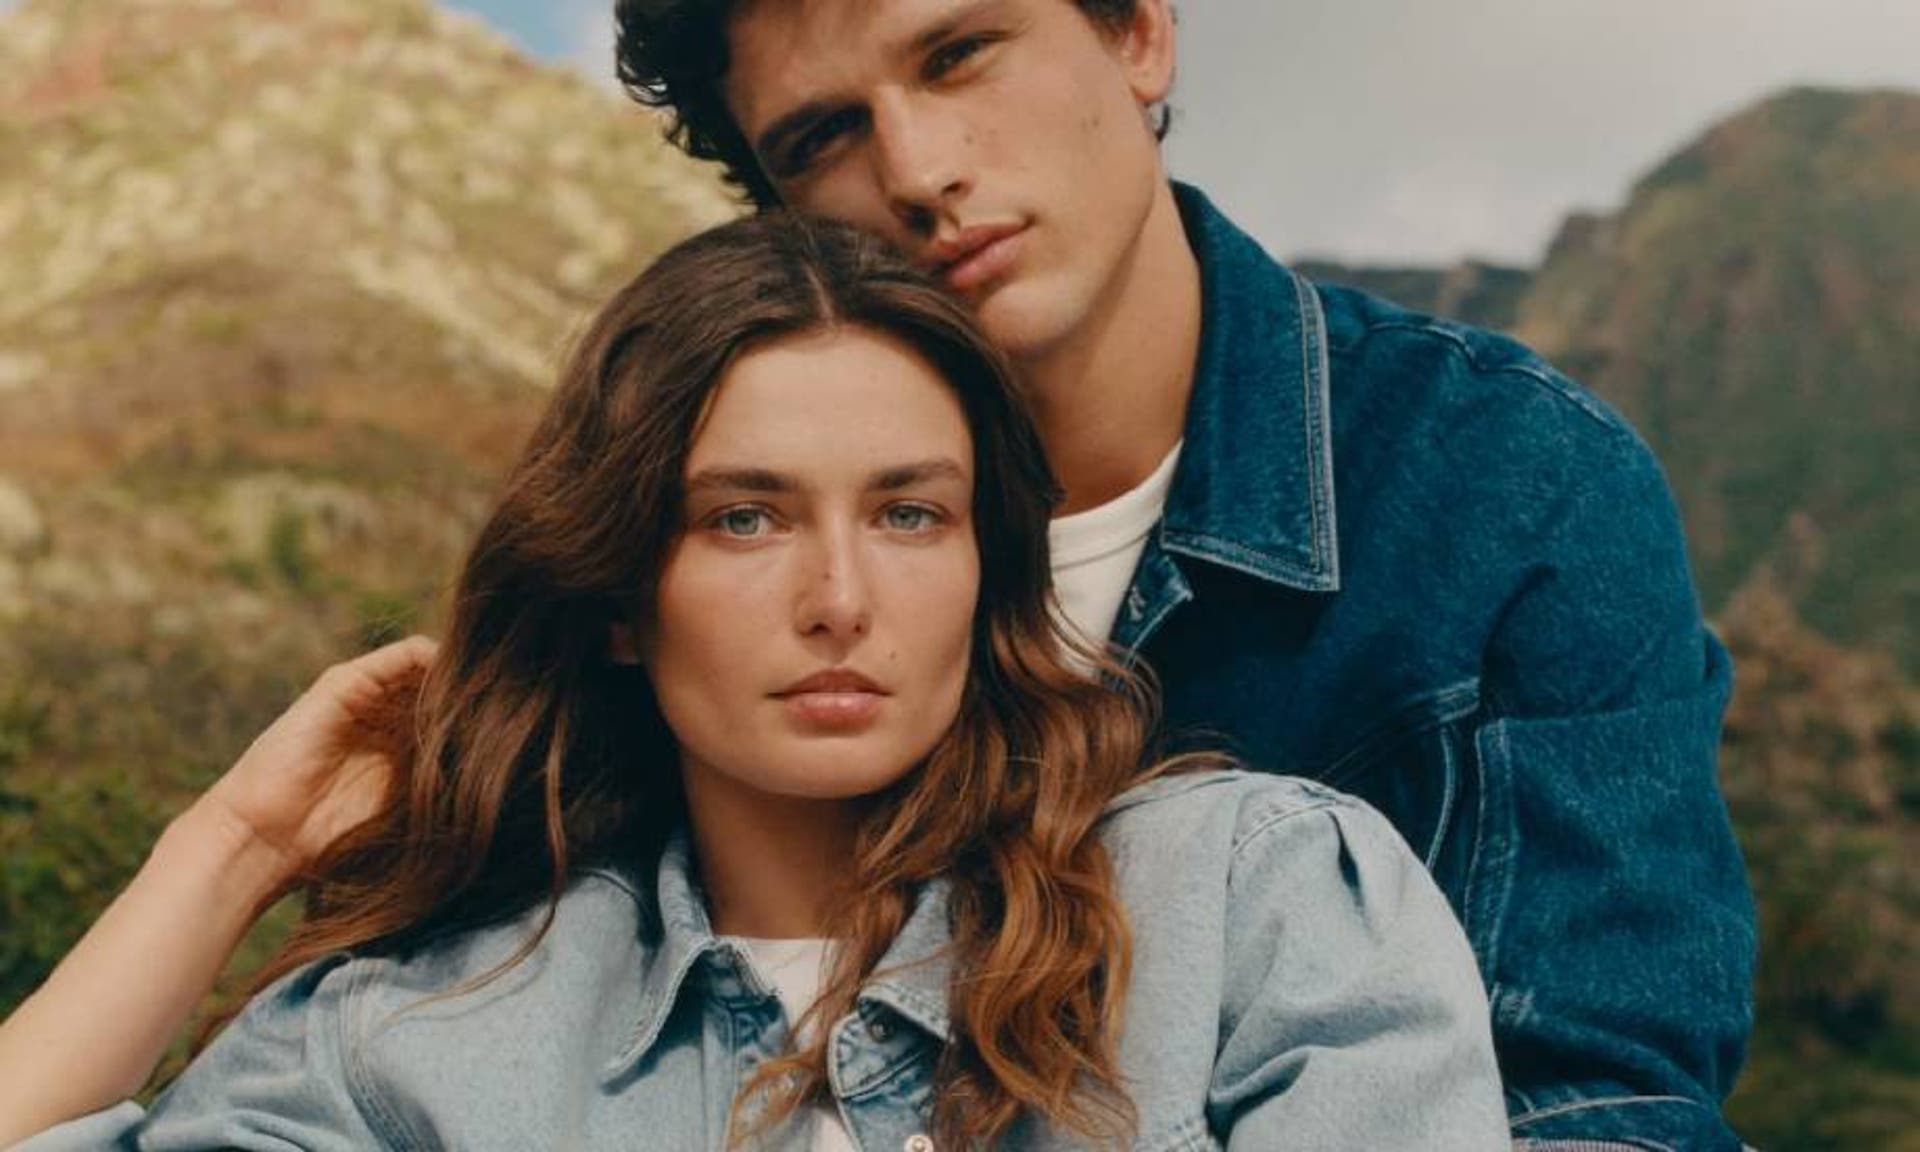  A brunette couple wearing matching denim jackets and white tops from Mango, sat close together in front of a rural backdrop. 